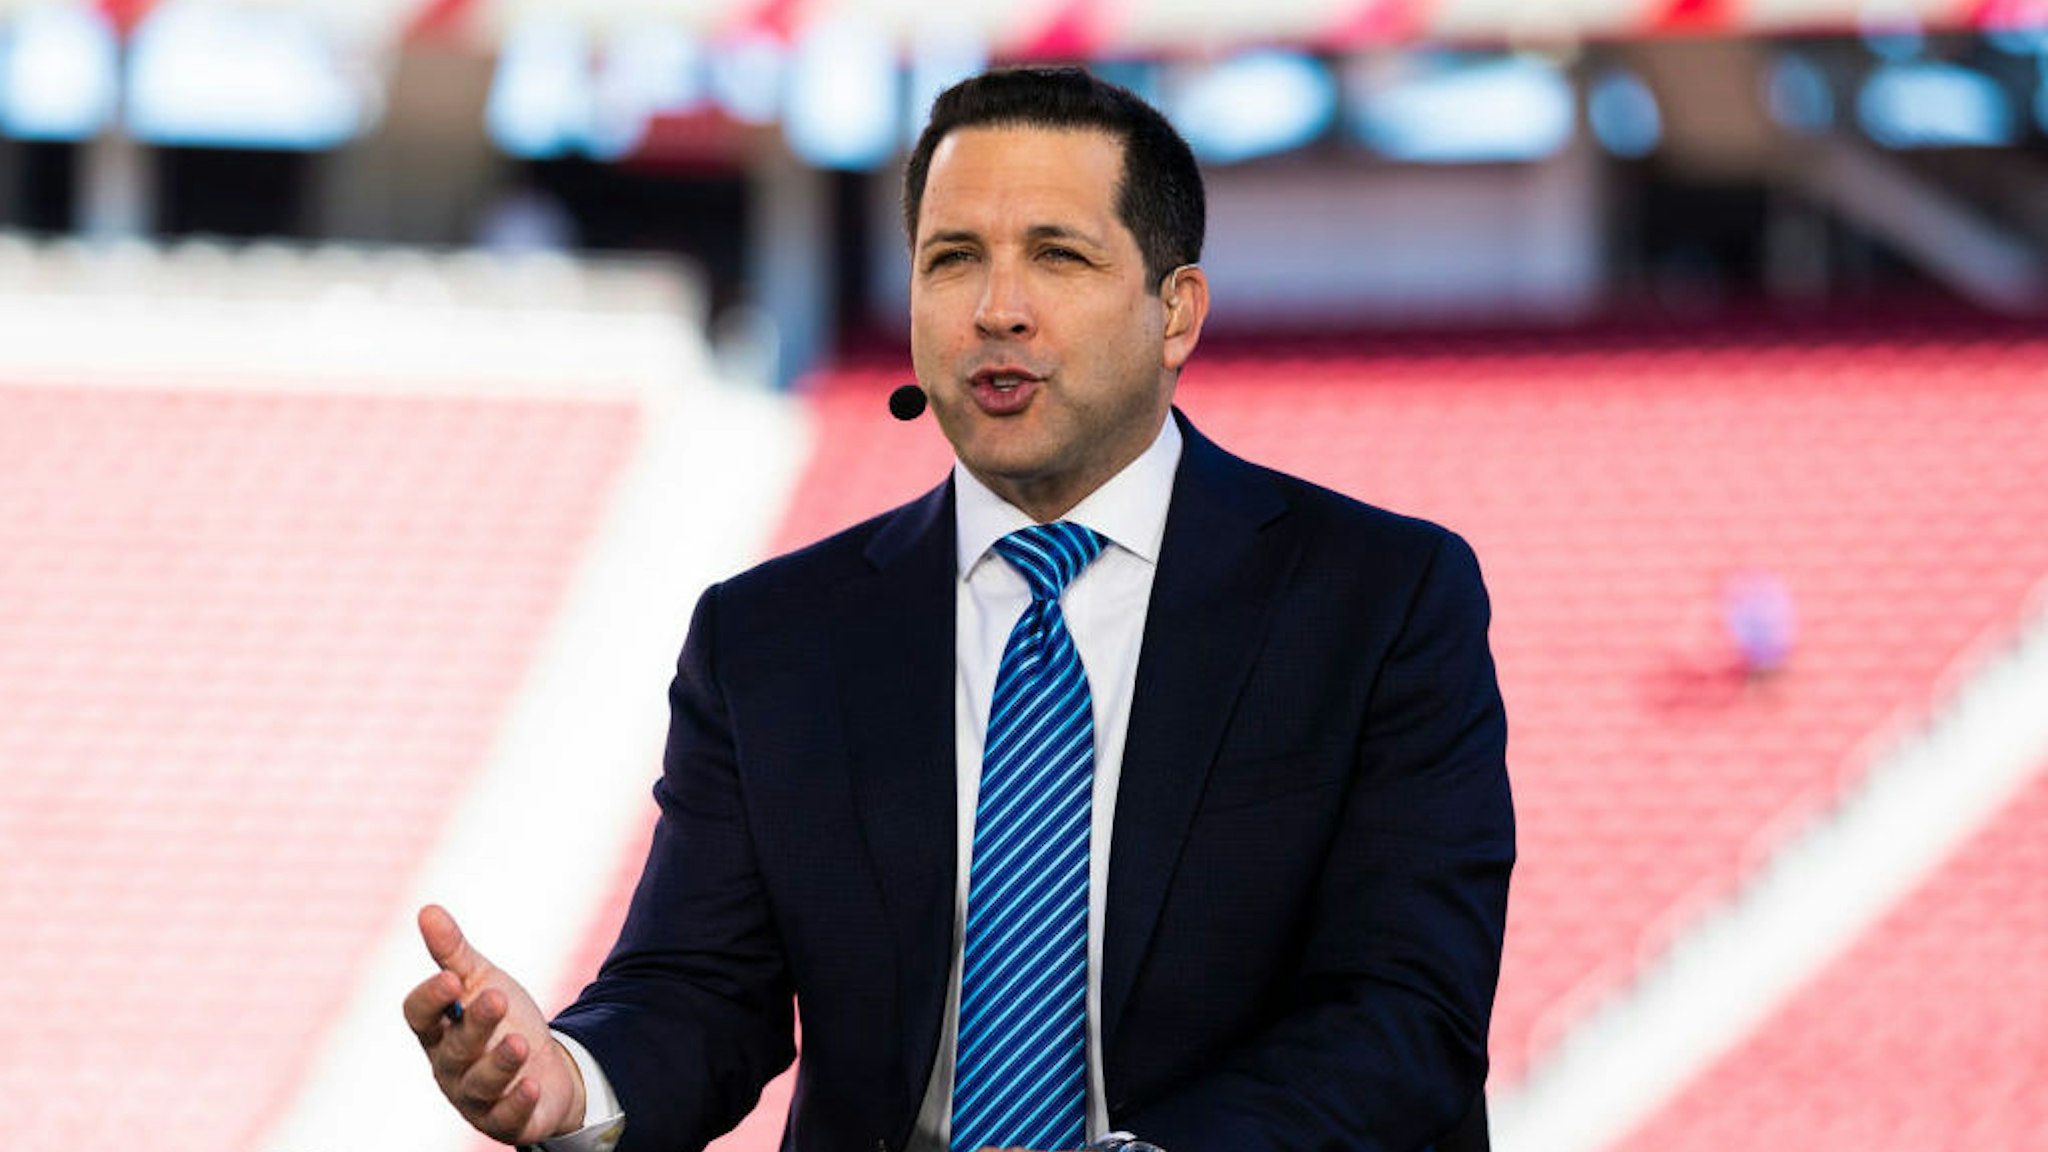 SANTA CLARA, CA - OCTOBER 07: ESPN Monday Night Football Studio Analysts Adam Schefter during the NFL regular season football game between the Cleveland Browns and the San Francisco 49ers on Monday, Oct. 7, 2019 at Levi's Stadium in Santa Clara, Calif. (Photo by Ric Tapia/Icon Sportswire via Getty Images)